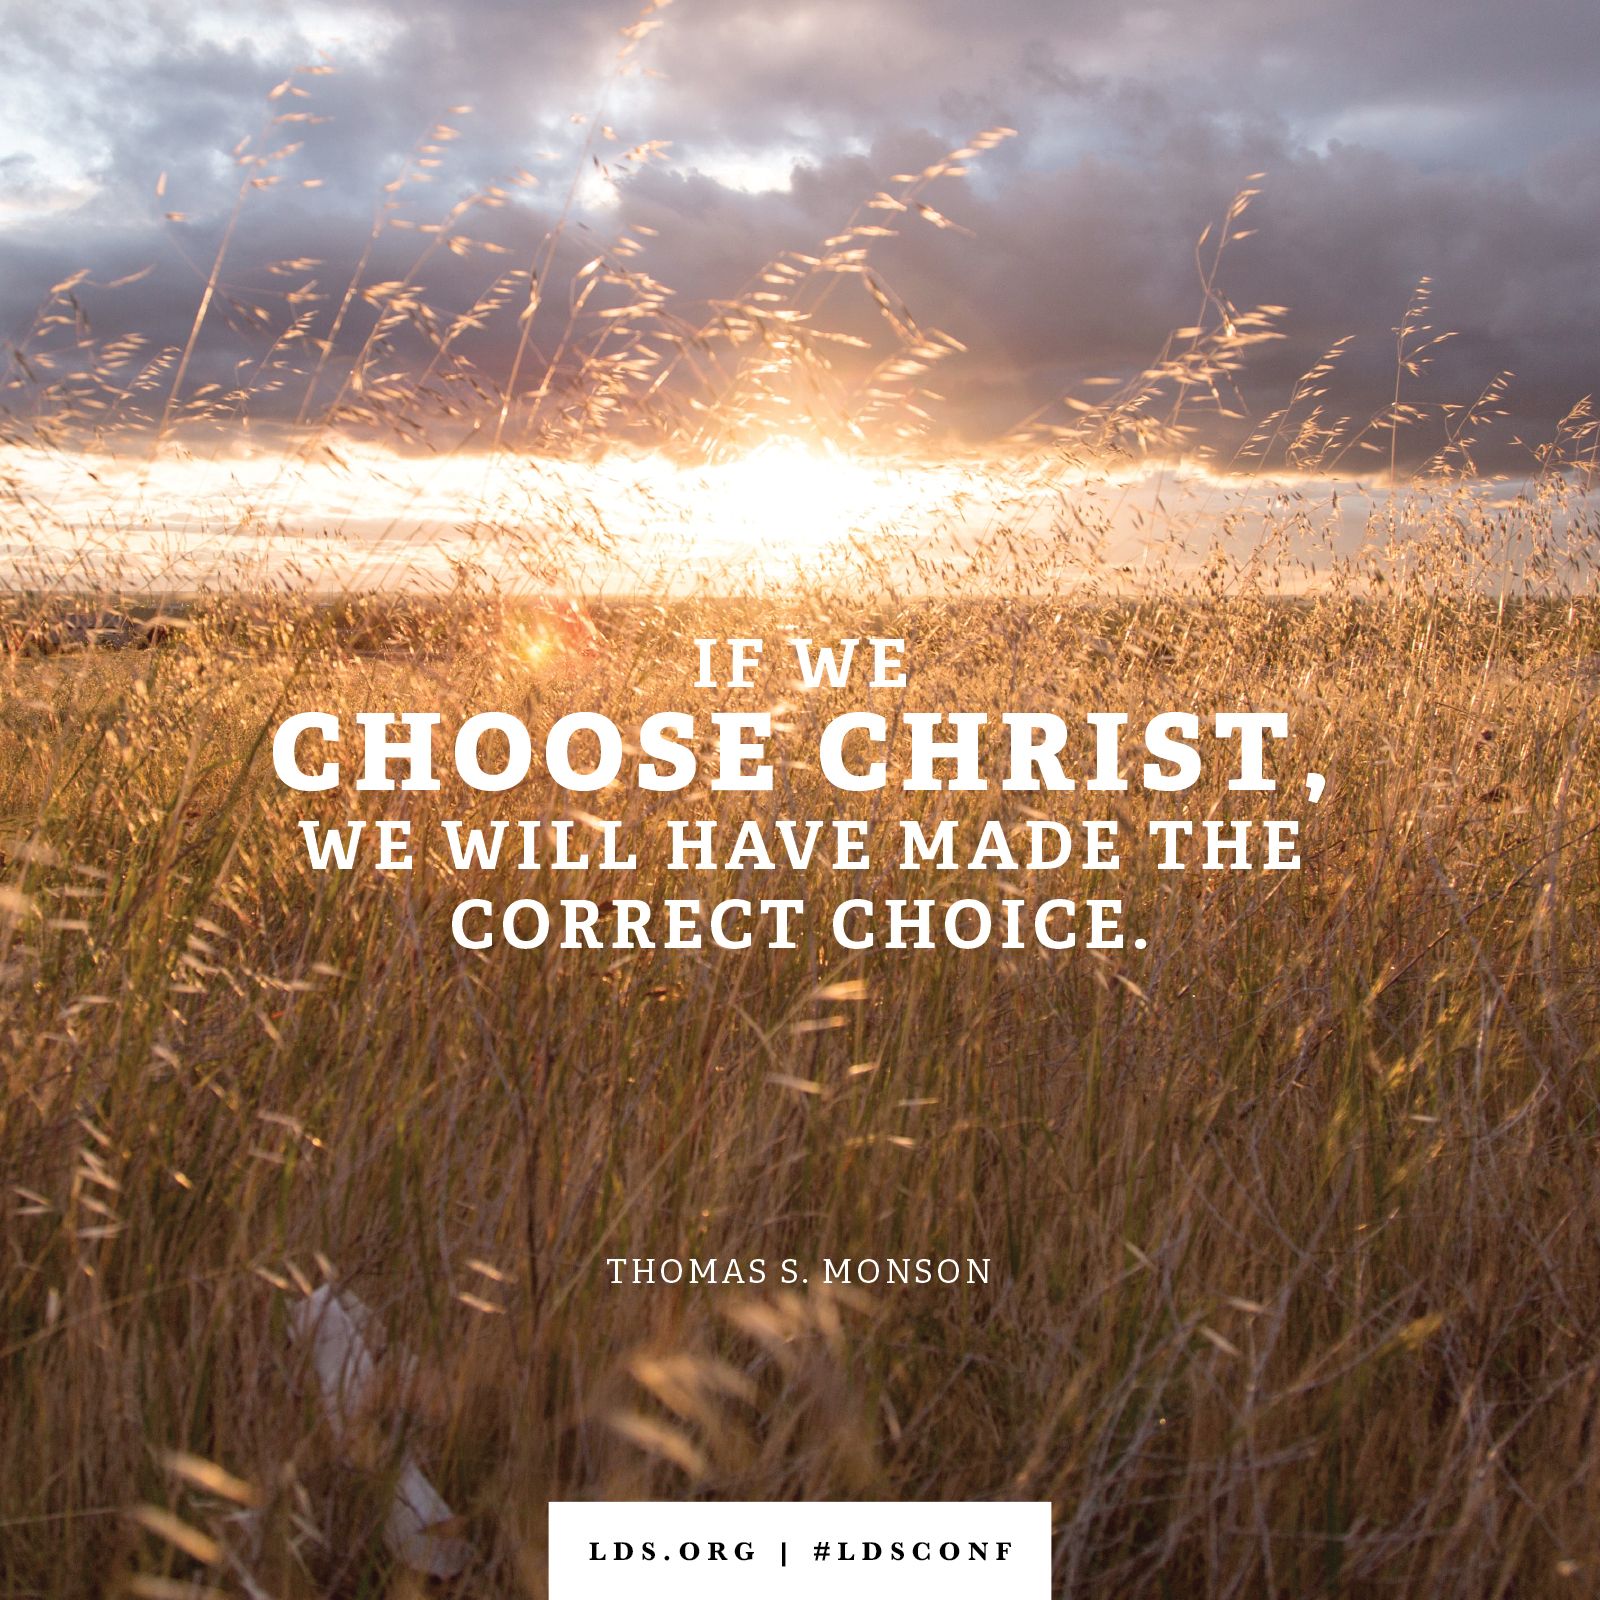 “If we choose Christ, we will have made the correct choice.” —President Thomas S. Monson, “Choices”